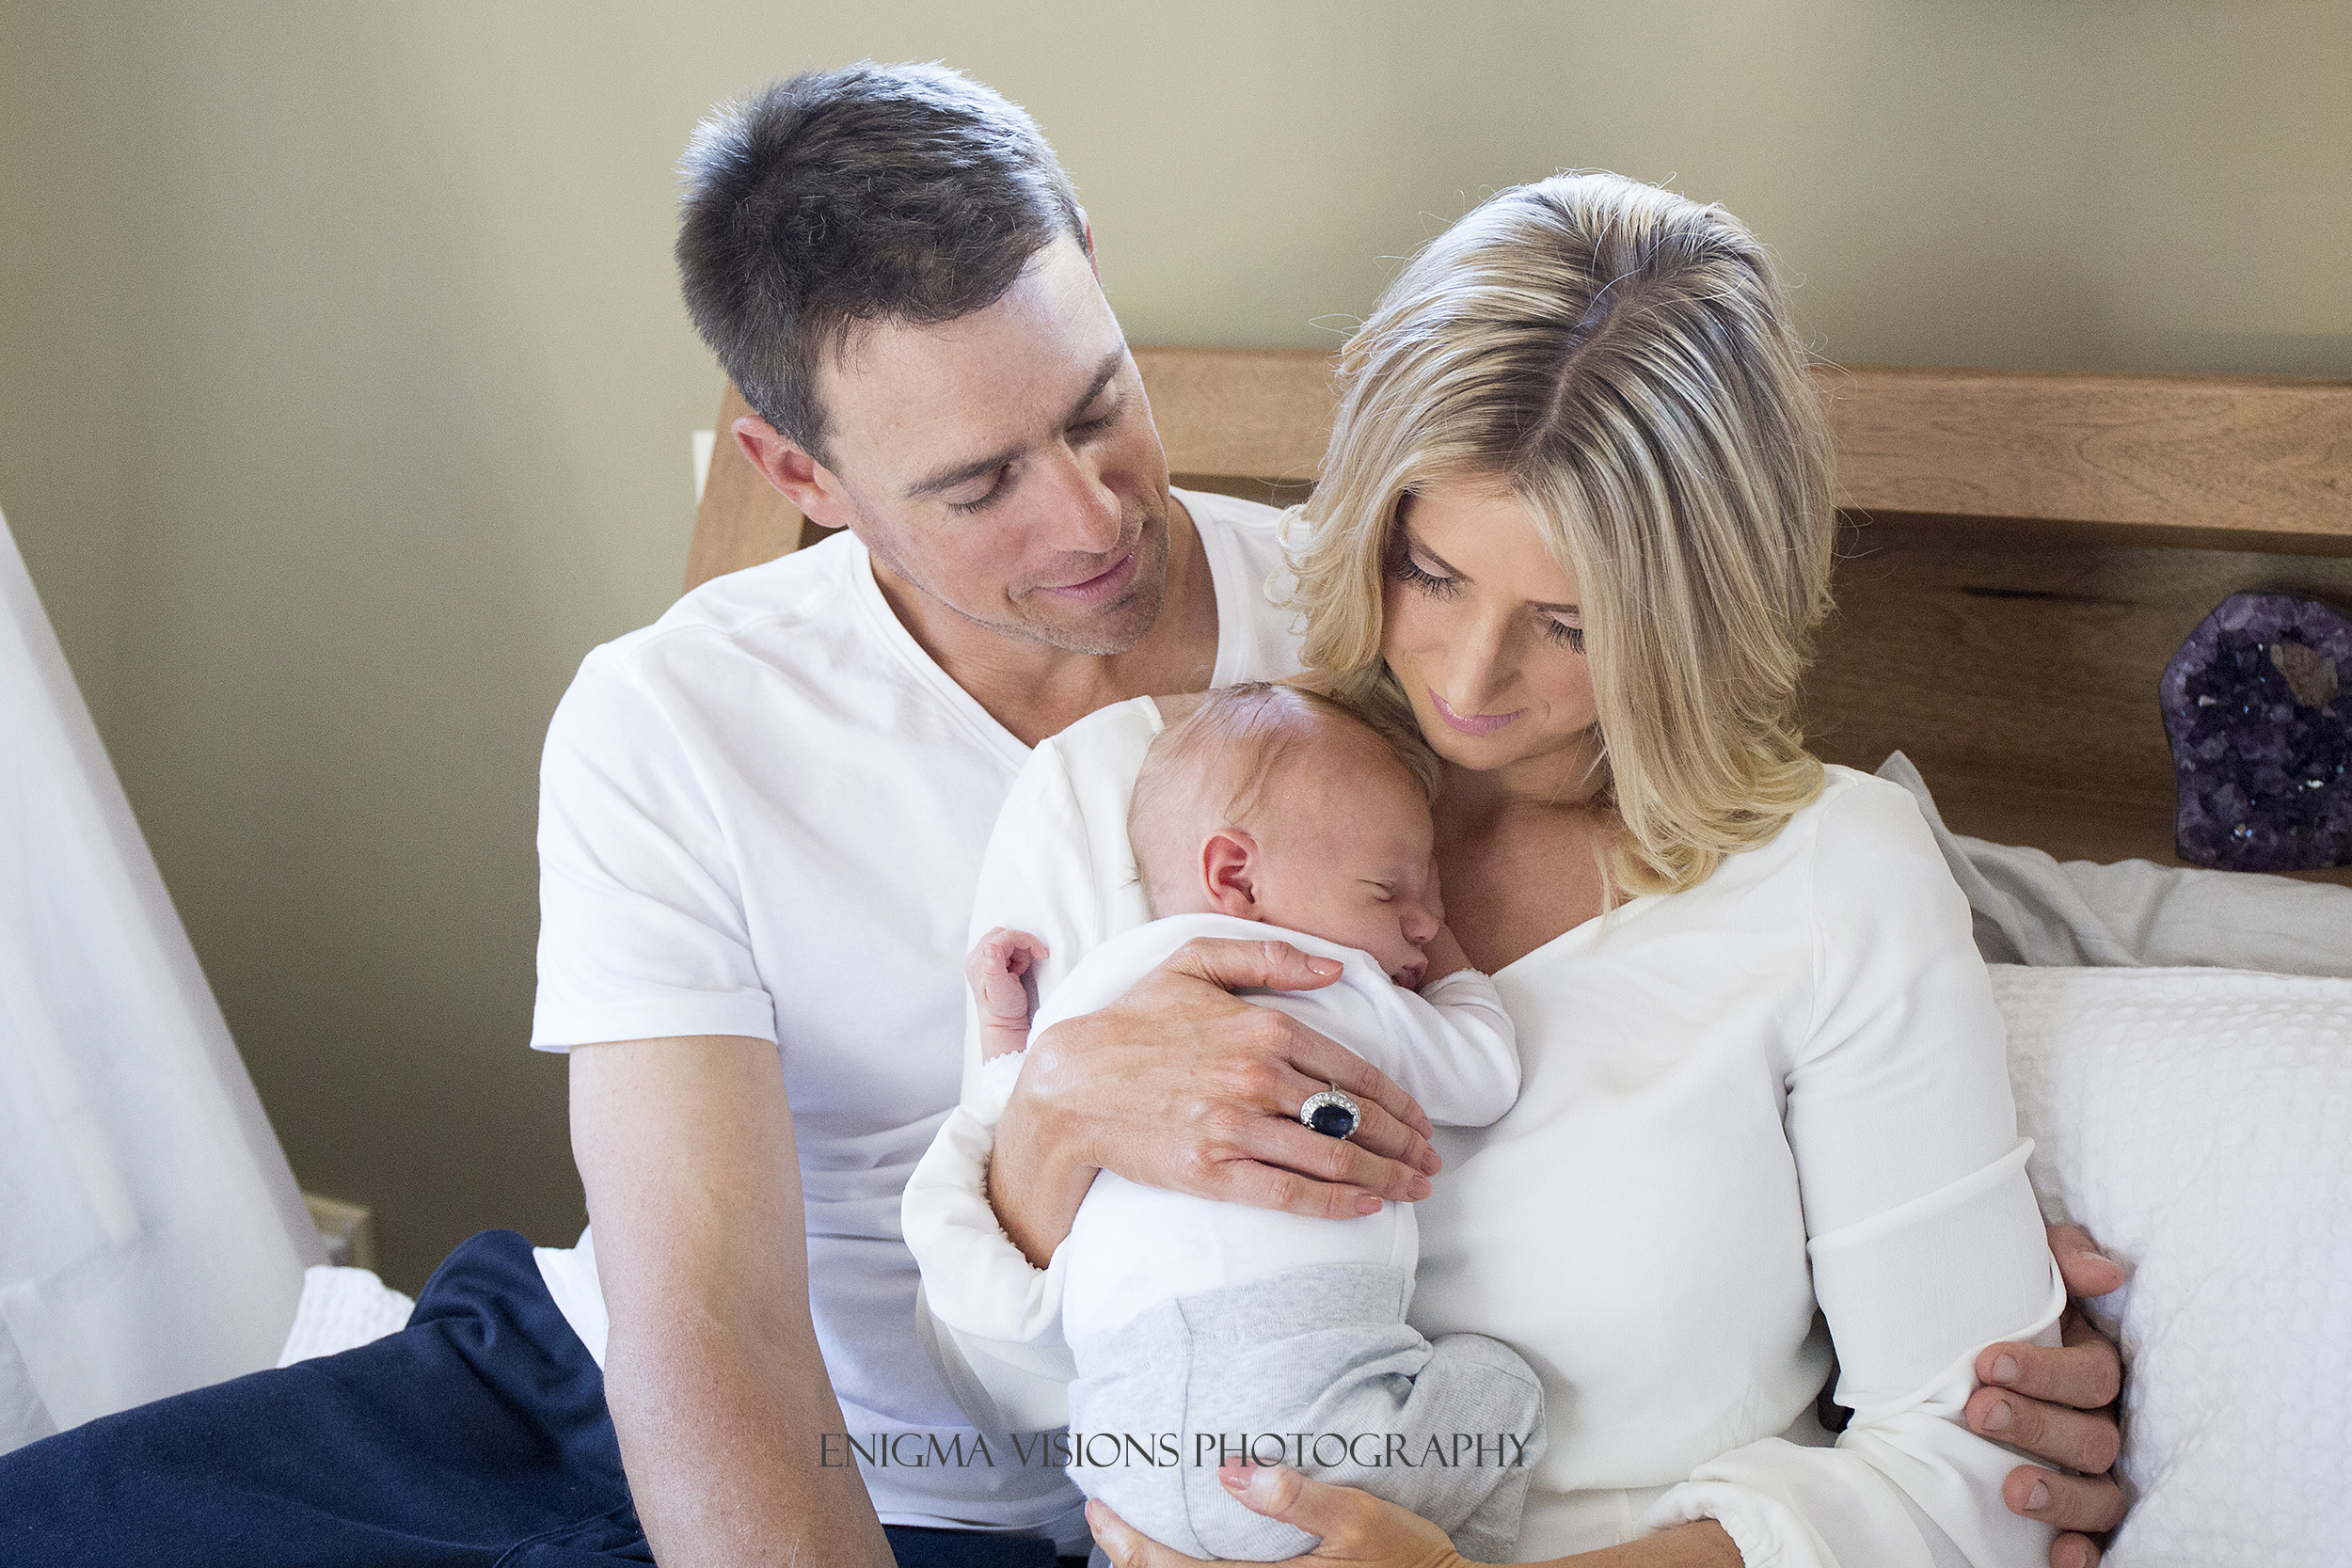 enigma_visions_photography_newborn_lifestyle_lux (26) copy.jpg